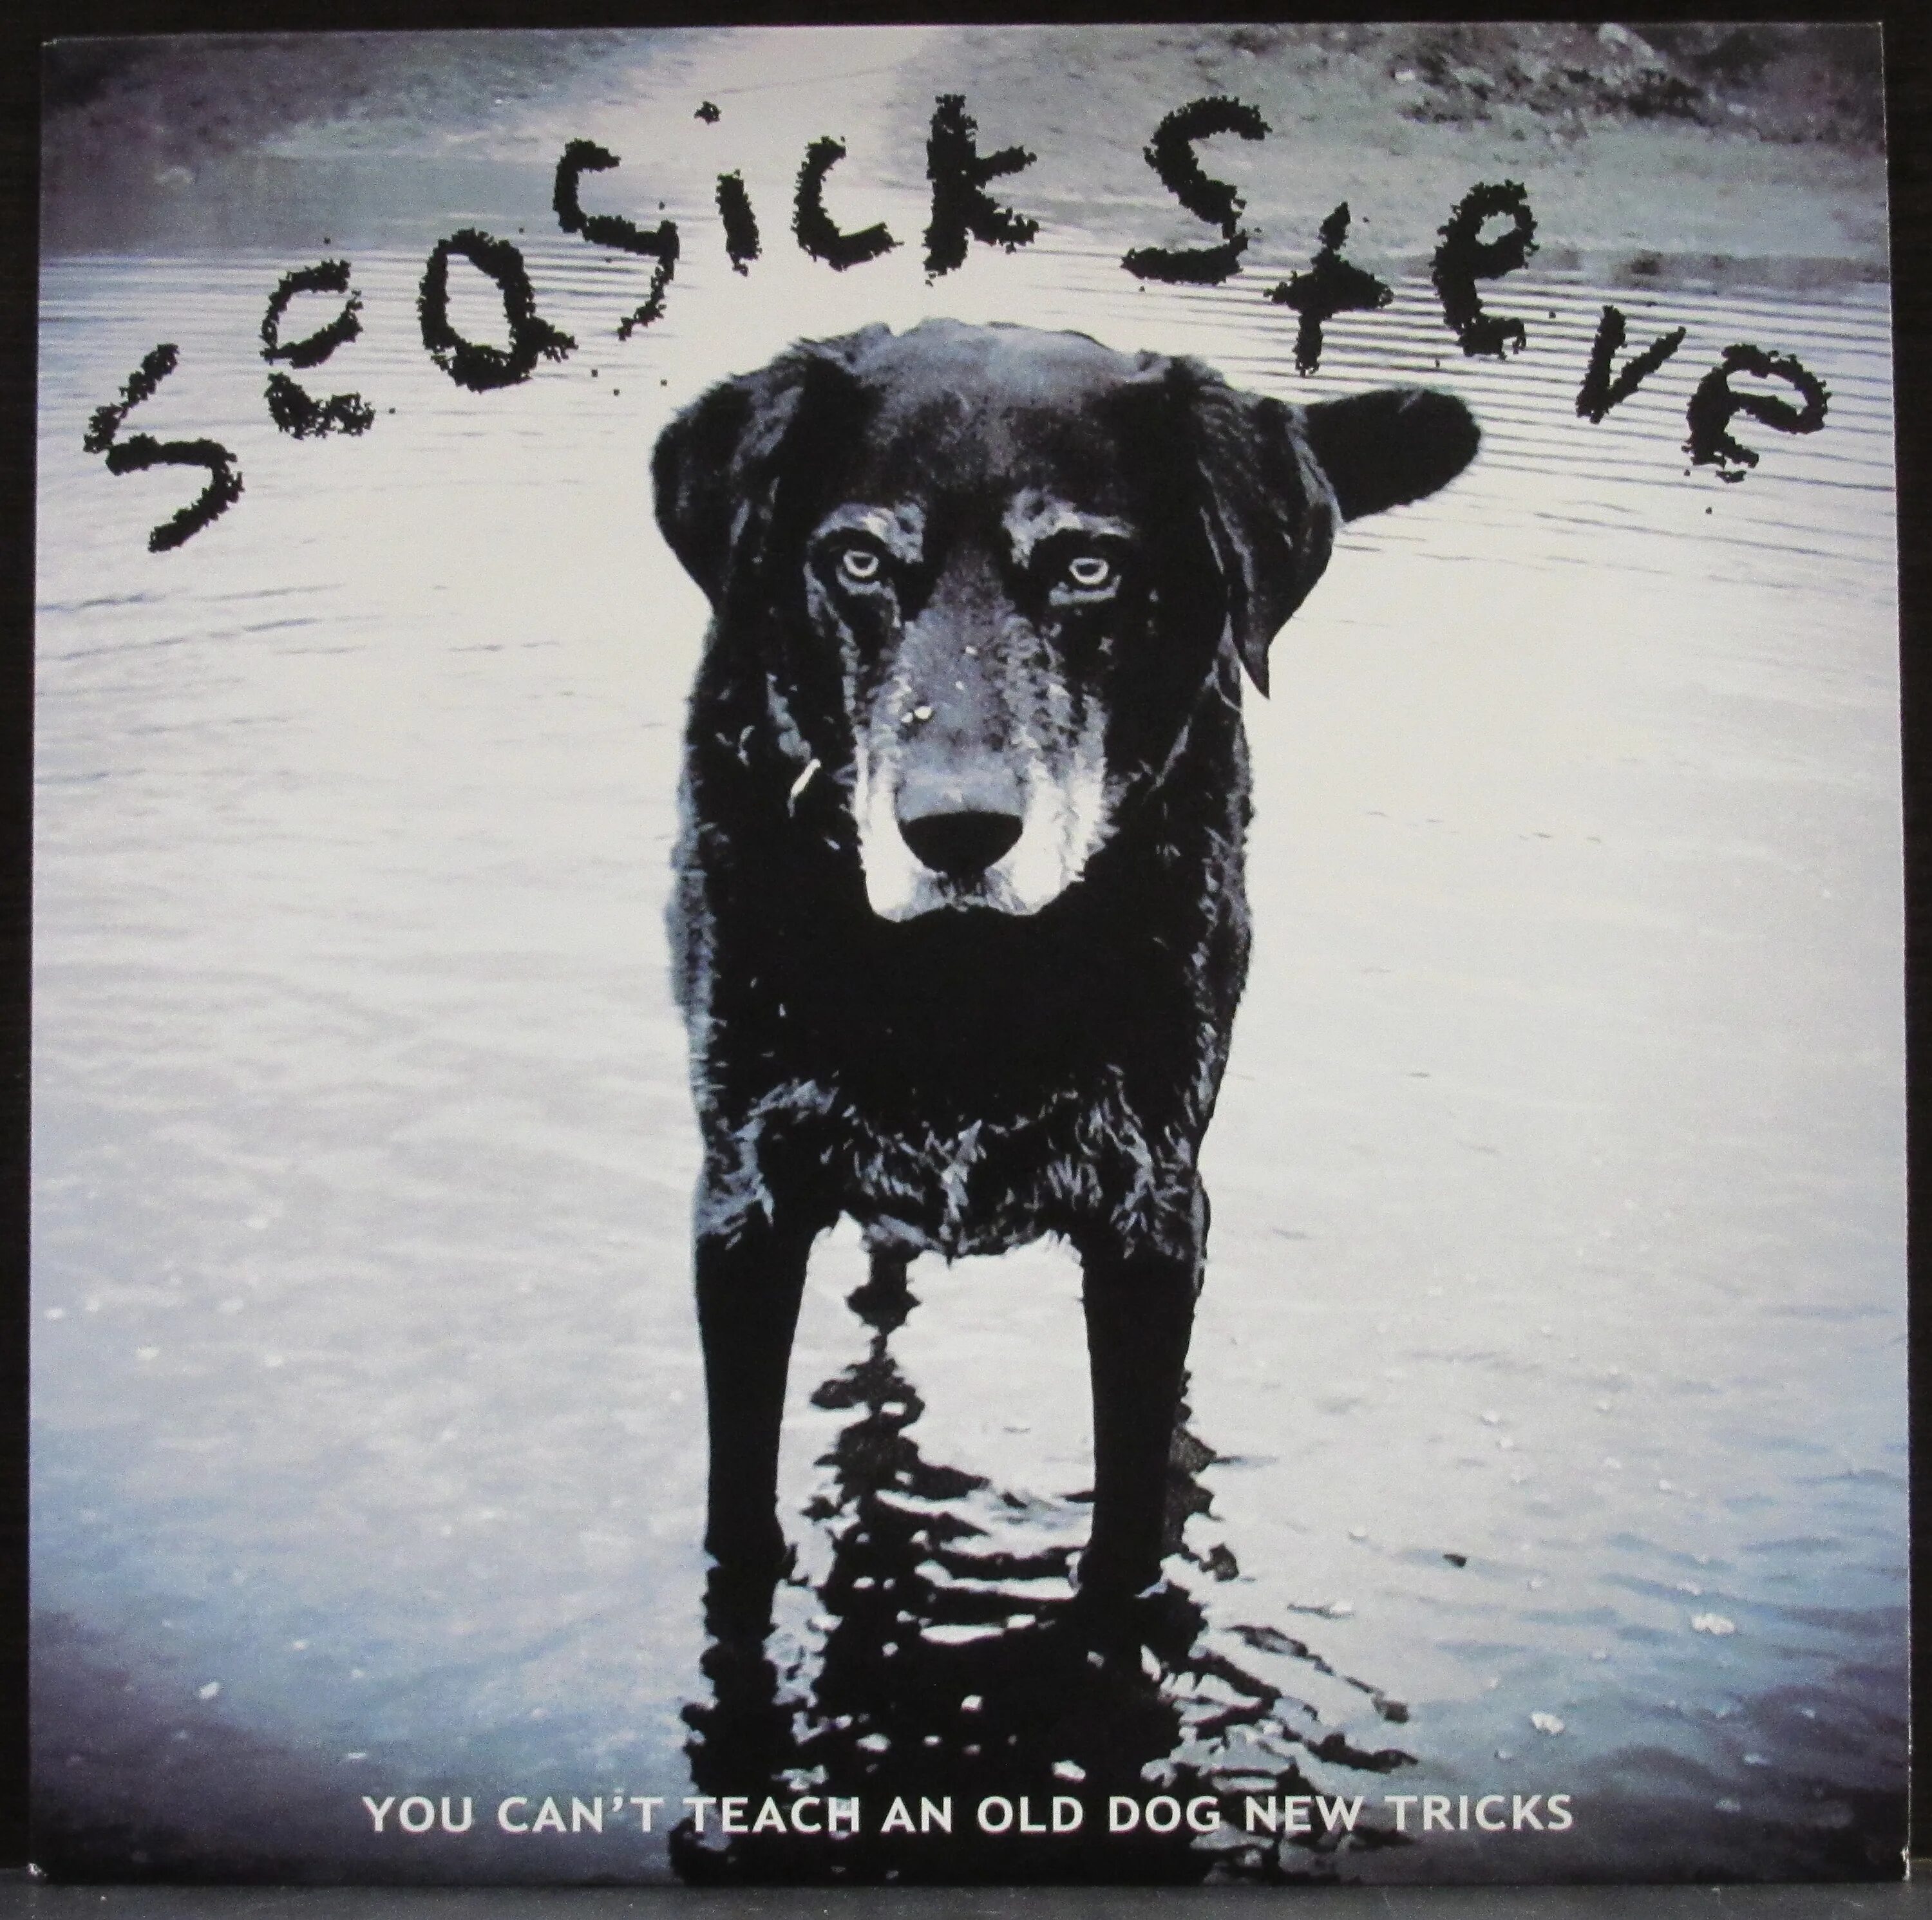 Old dog new tricks. Seasick Steve you can't teach an old Dog New Tricks. Teach an old Dog New Tricks. Seasick Steve cant teach.